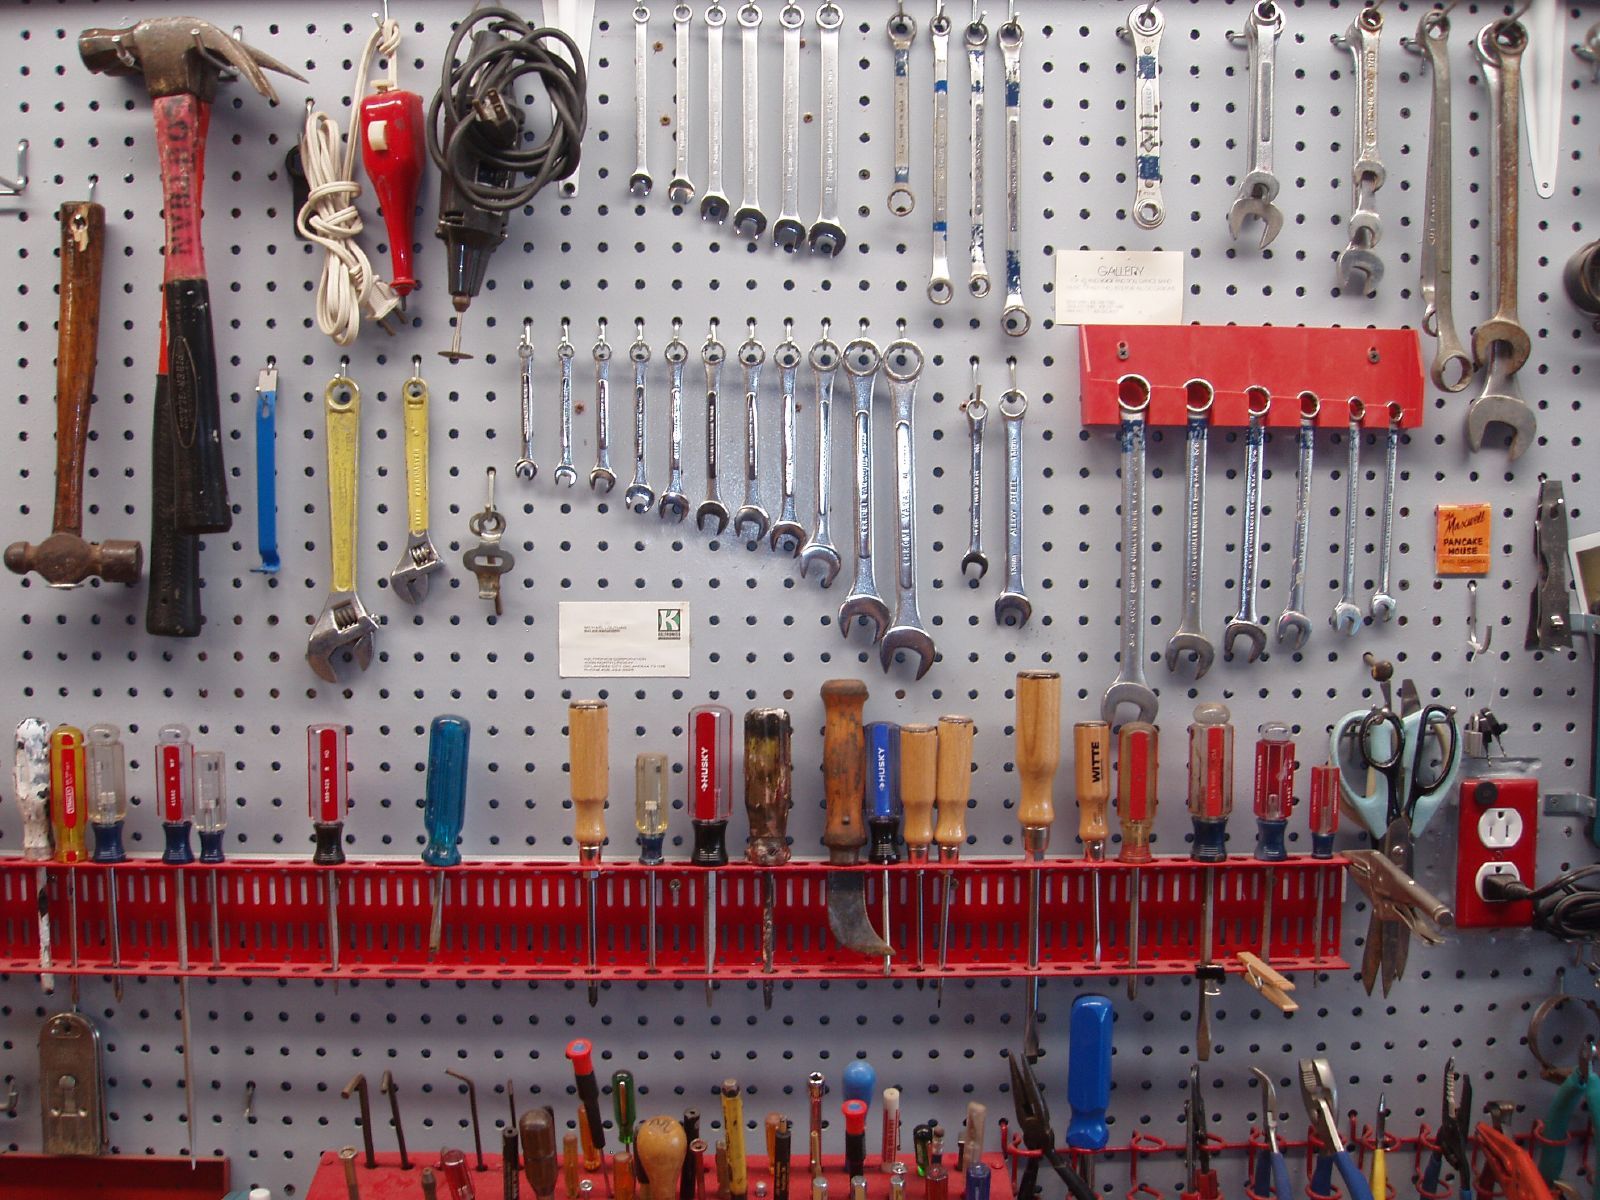 Tools Pegboard Layout | peacecommission.kdsg.gov.ng